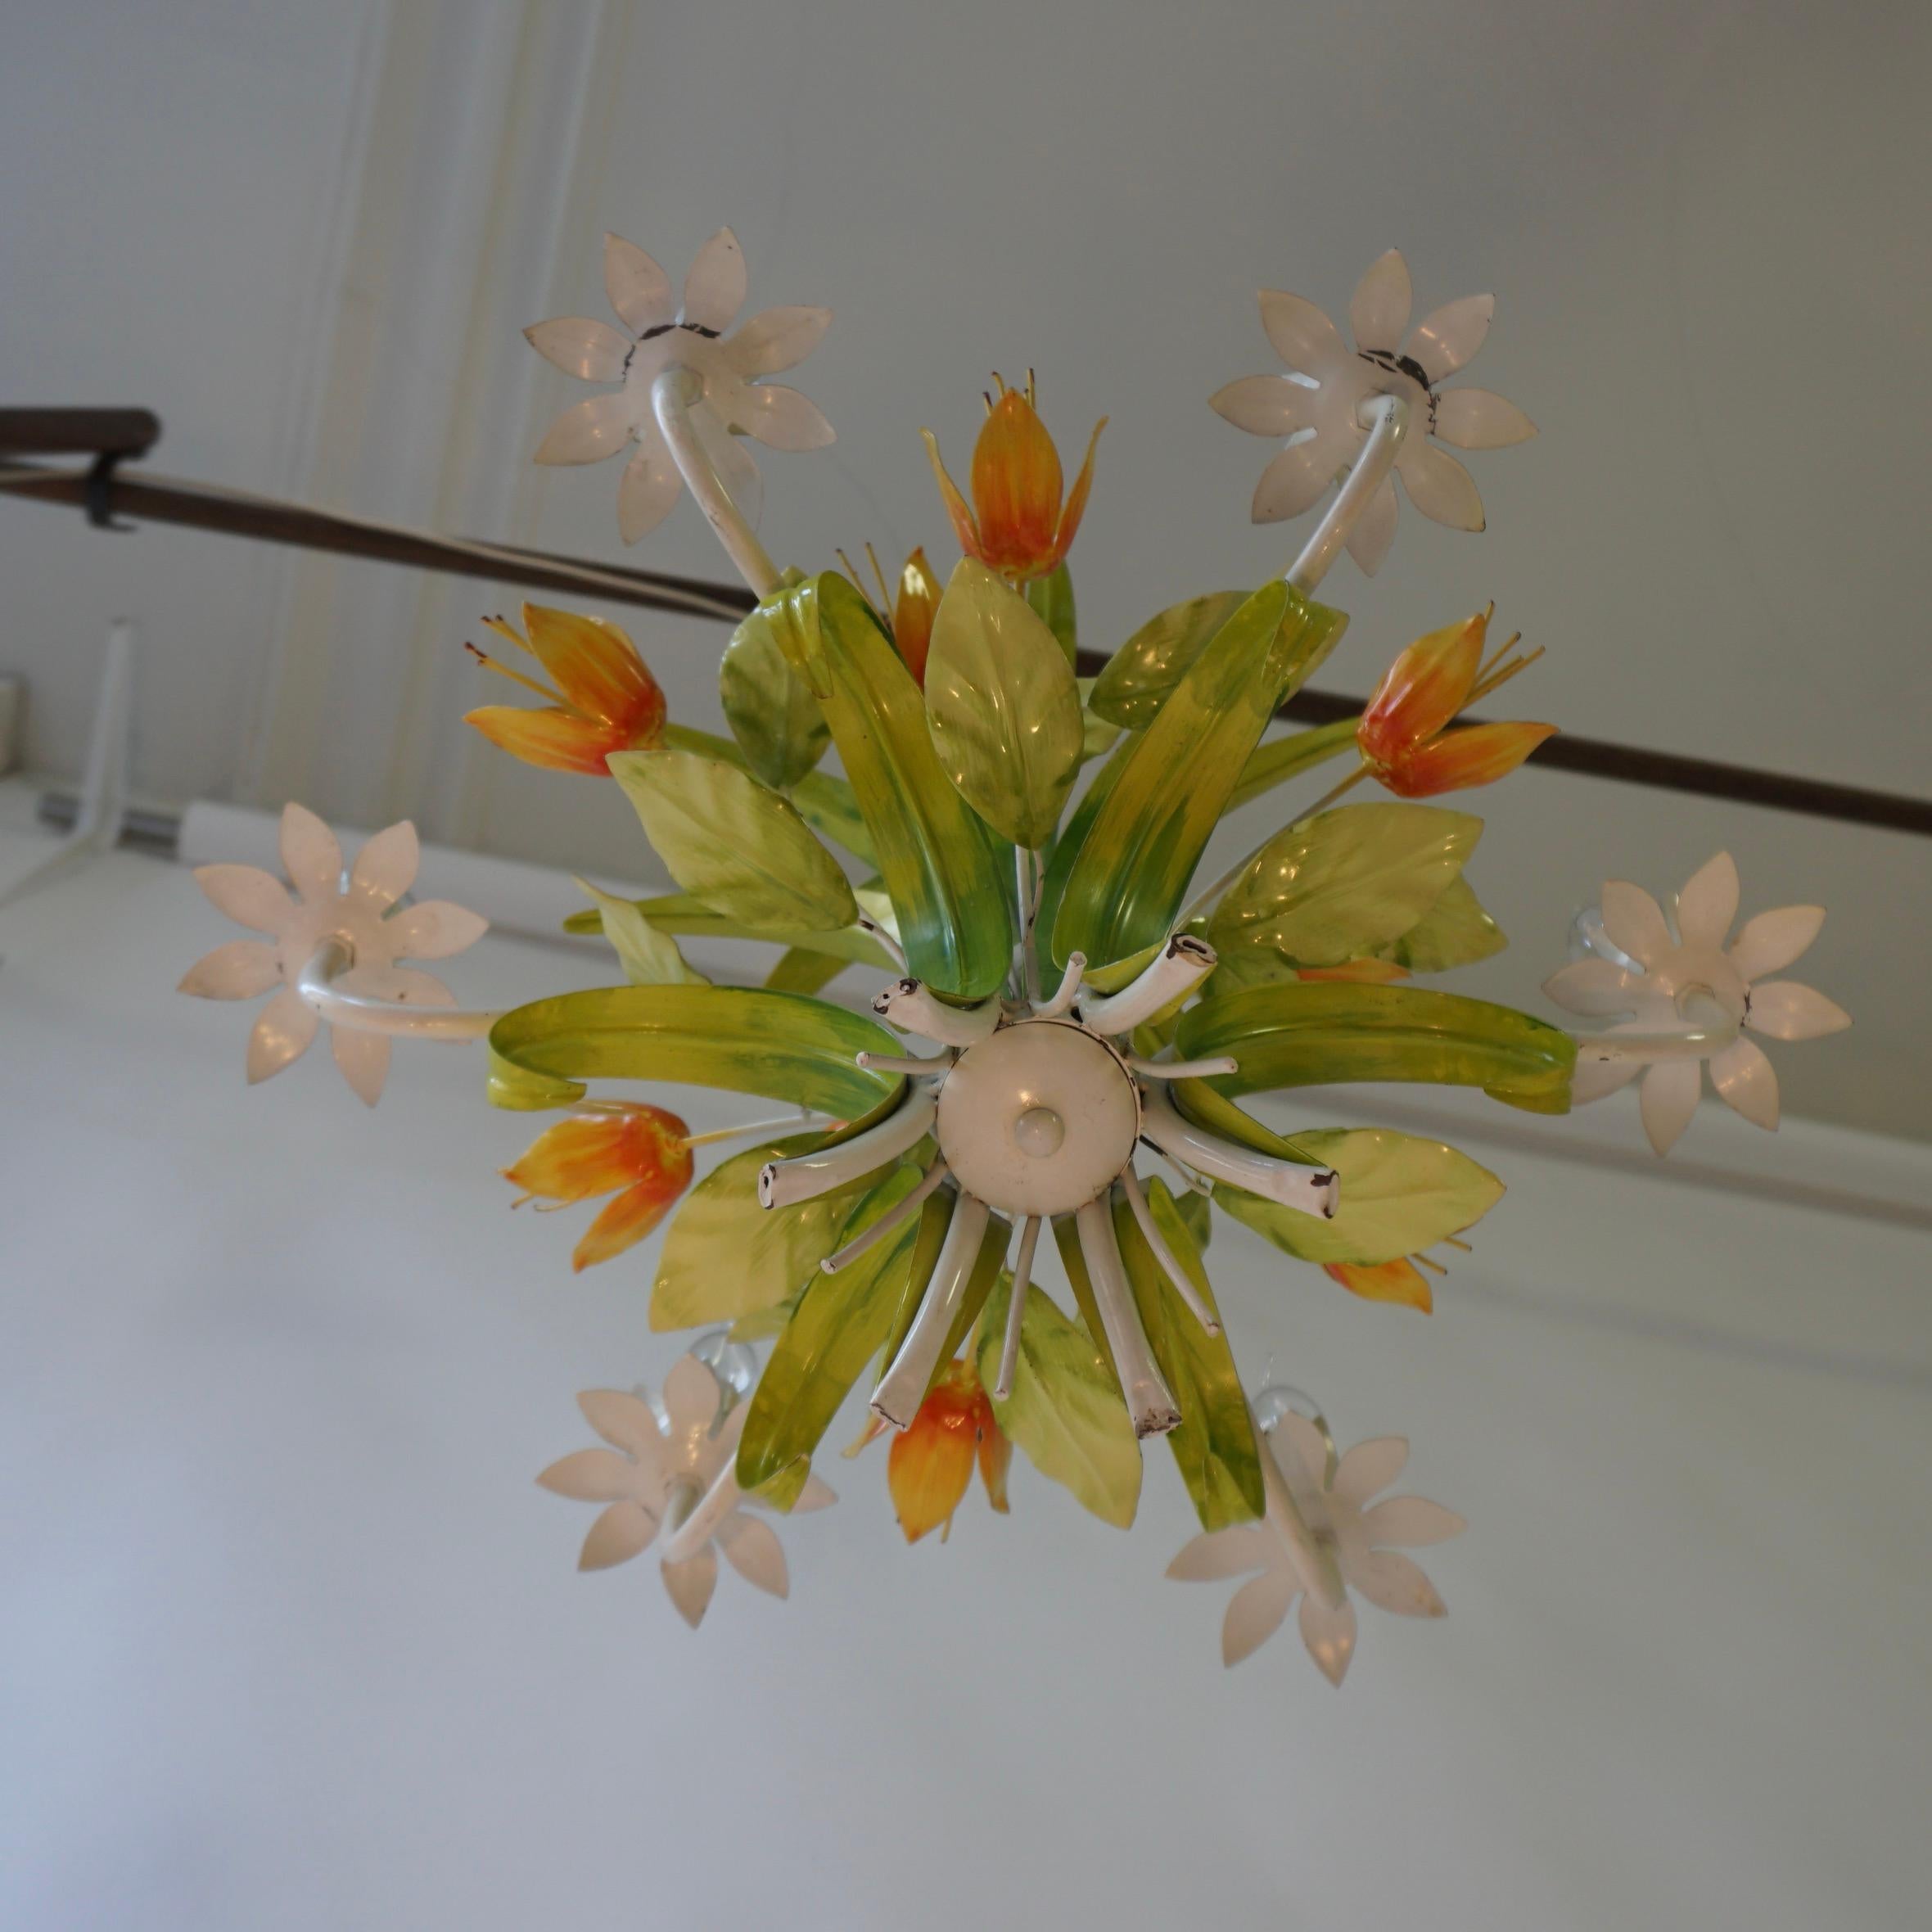 20th Century 1960s Bright Boho Chic Italian Tole Painted Metal Chandelier With Floral Decor For Sale